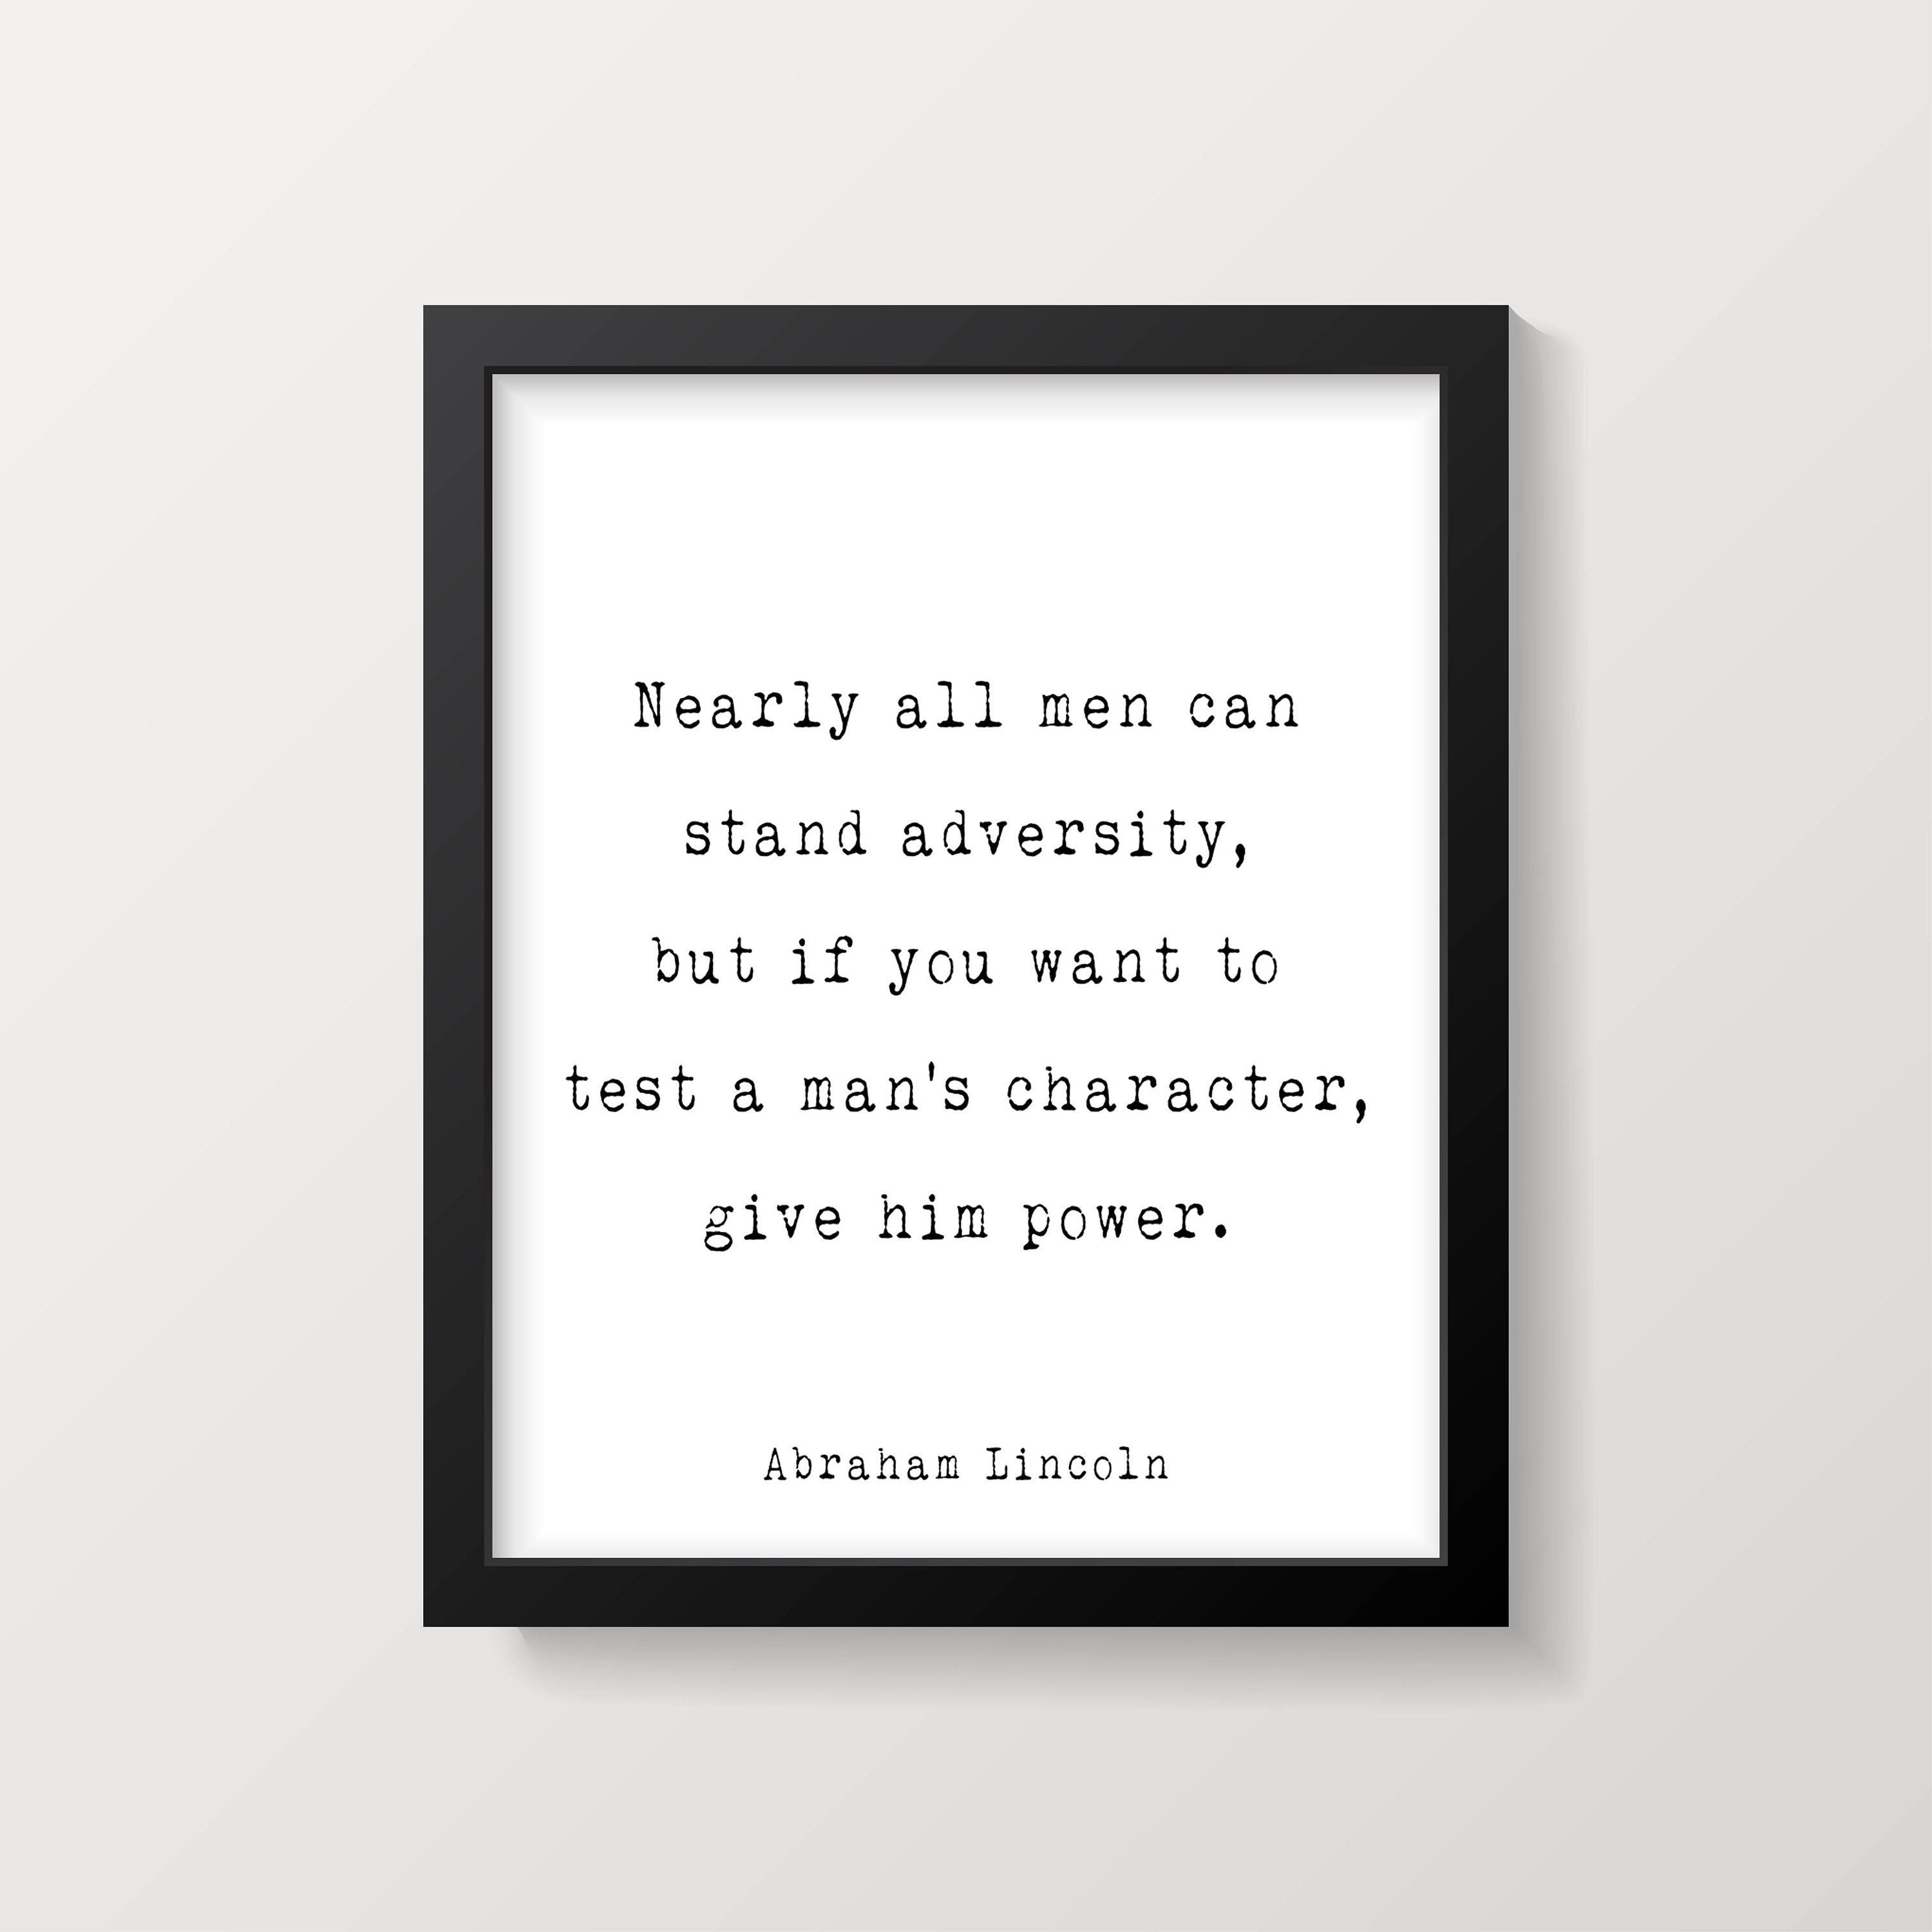 Abraham Lincoln If You Want To Test A Man’s Character Give Him Power Presidential Quote Print for Office Wall Decor, Unframed and Framed Art